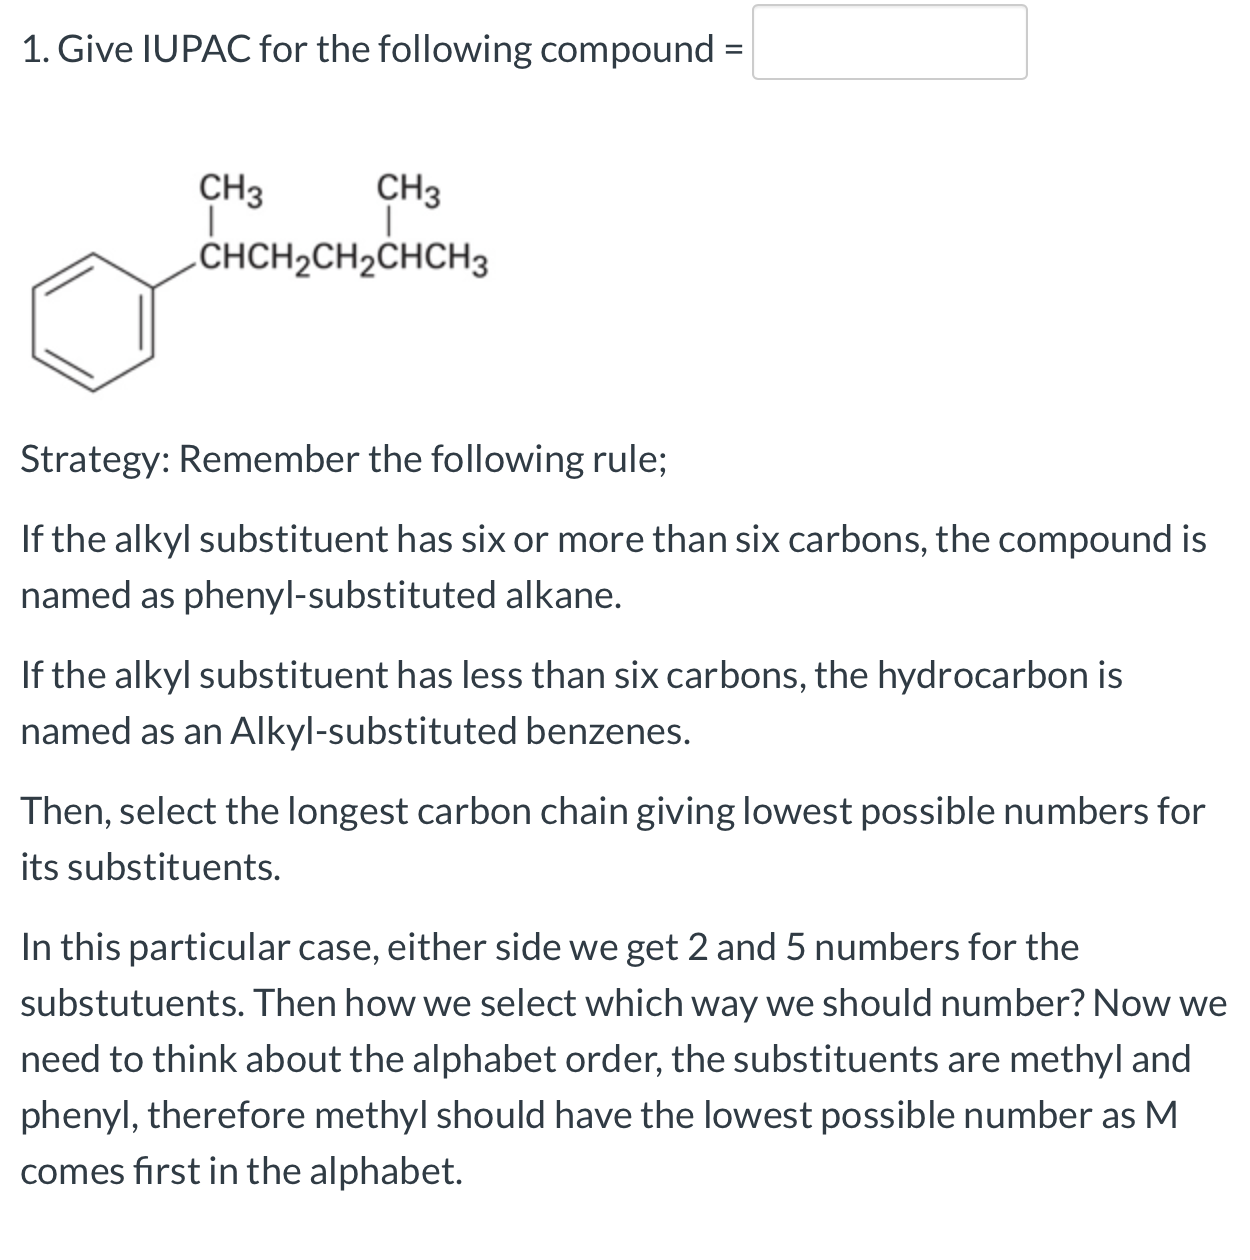 1. Give IUPAC for the following compound =
CH3
CH3
.CHCH2CH2CHCH3
